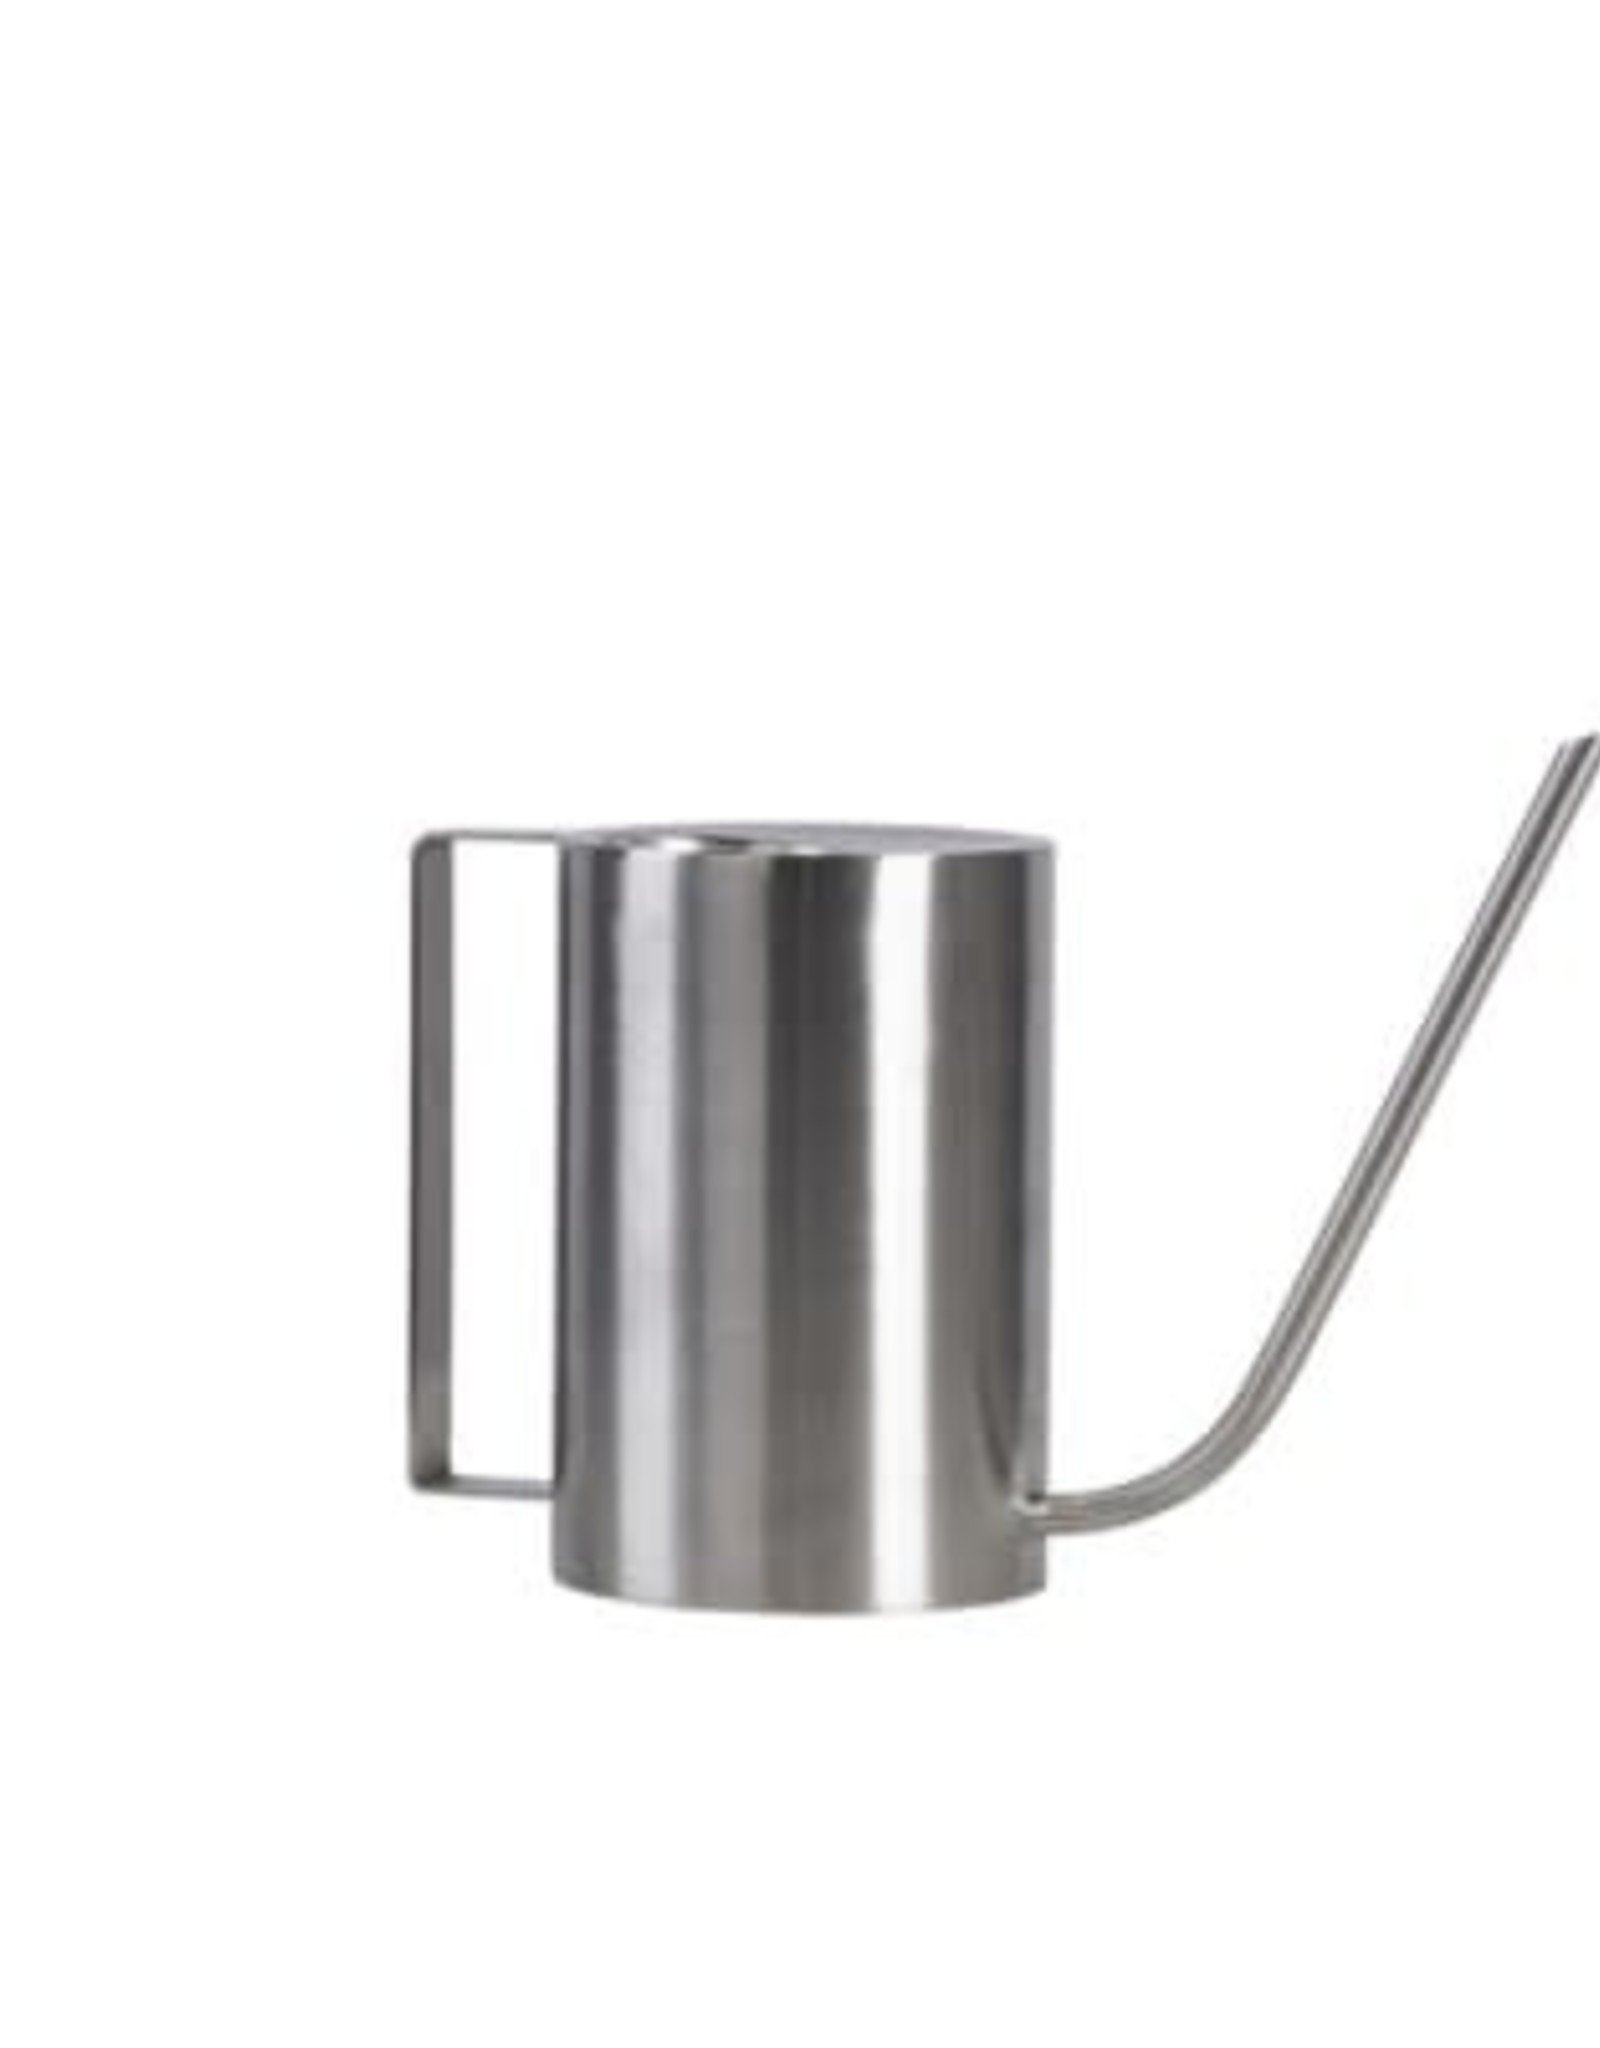 Stainless Steel Cylinder Watering Can  L10.6" W4.3" H7.5"